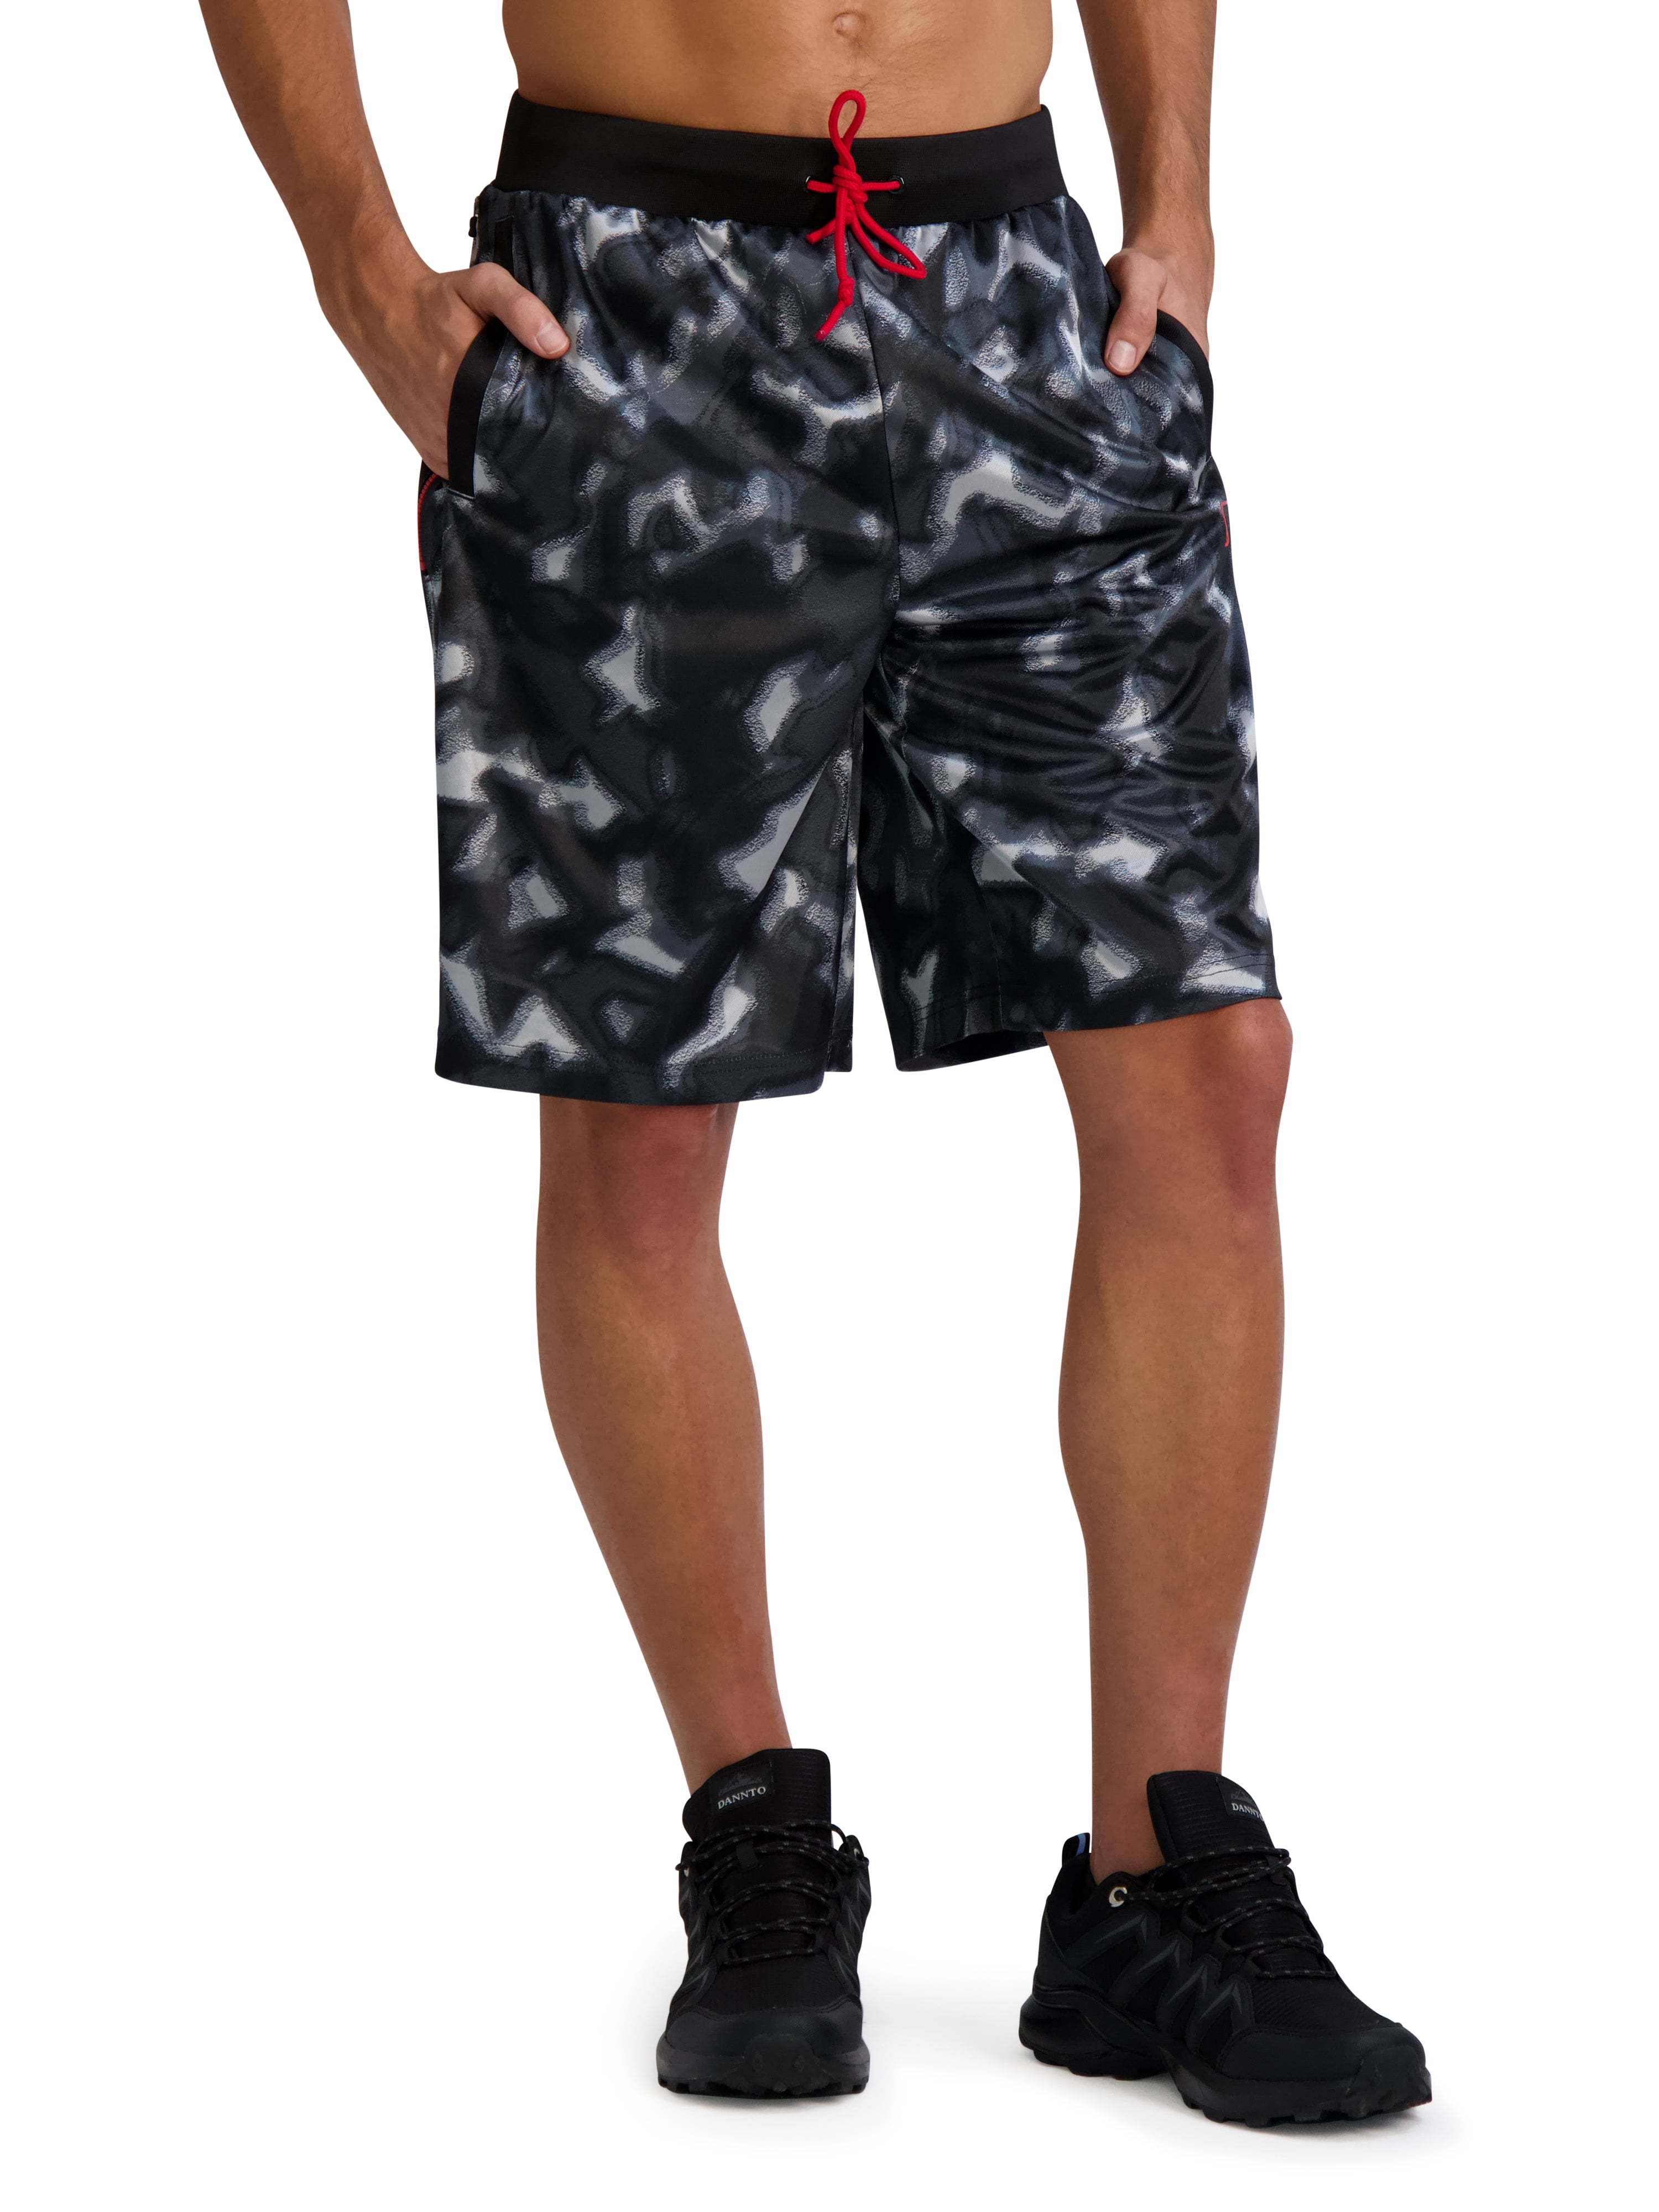 And-1 Men's Layup Shorts, Up To Size 5XL